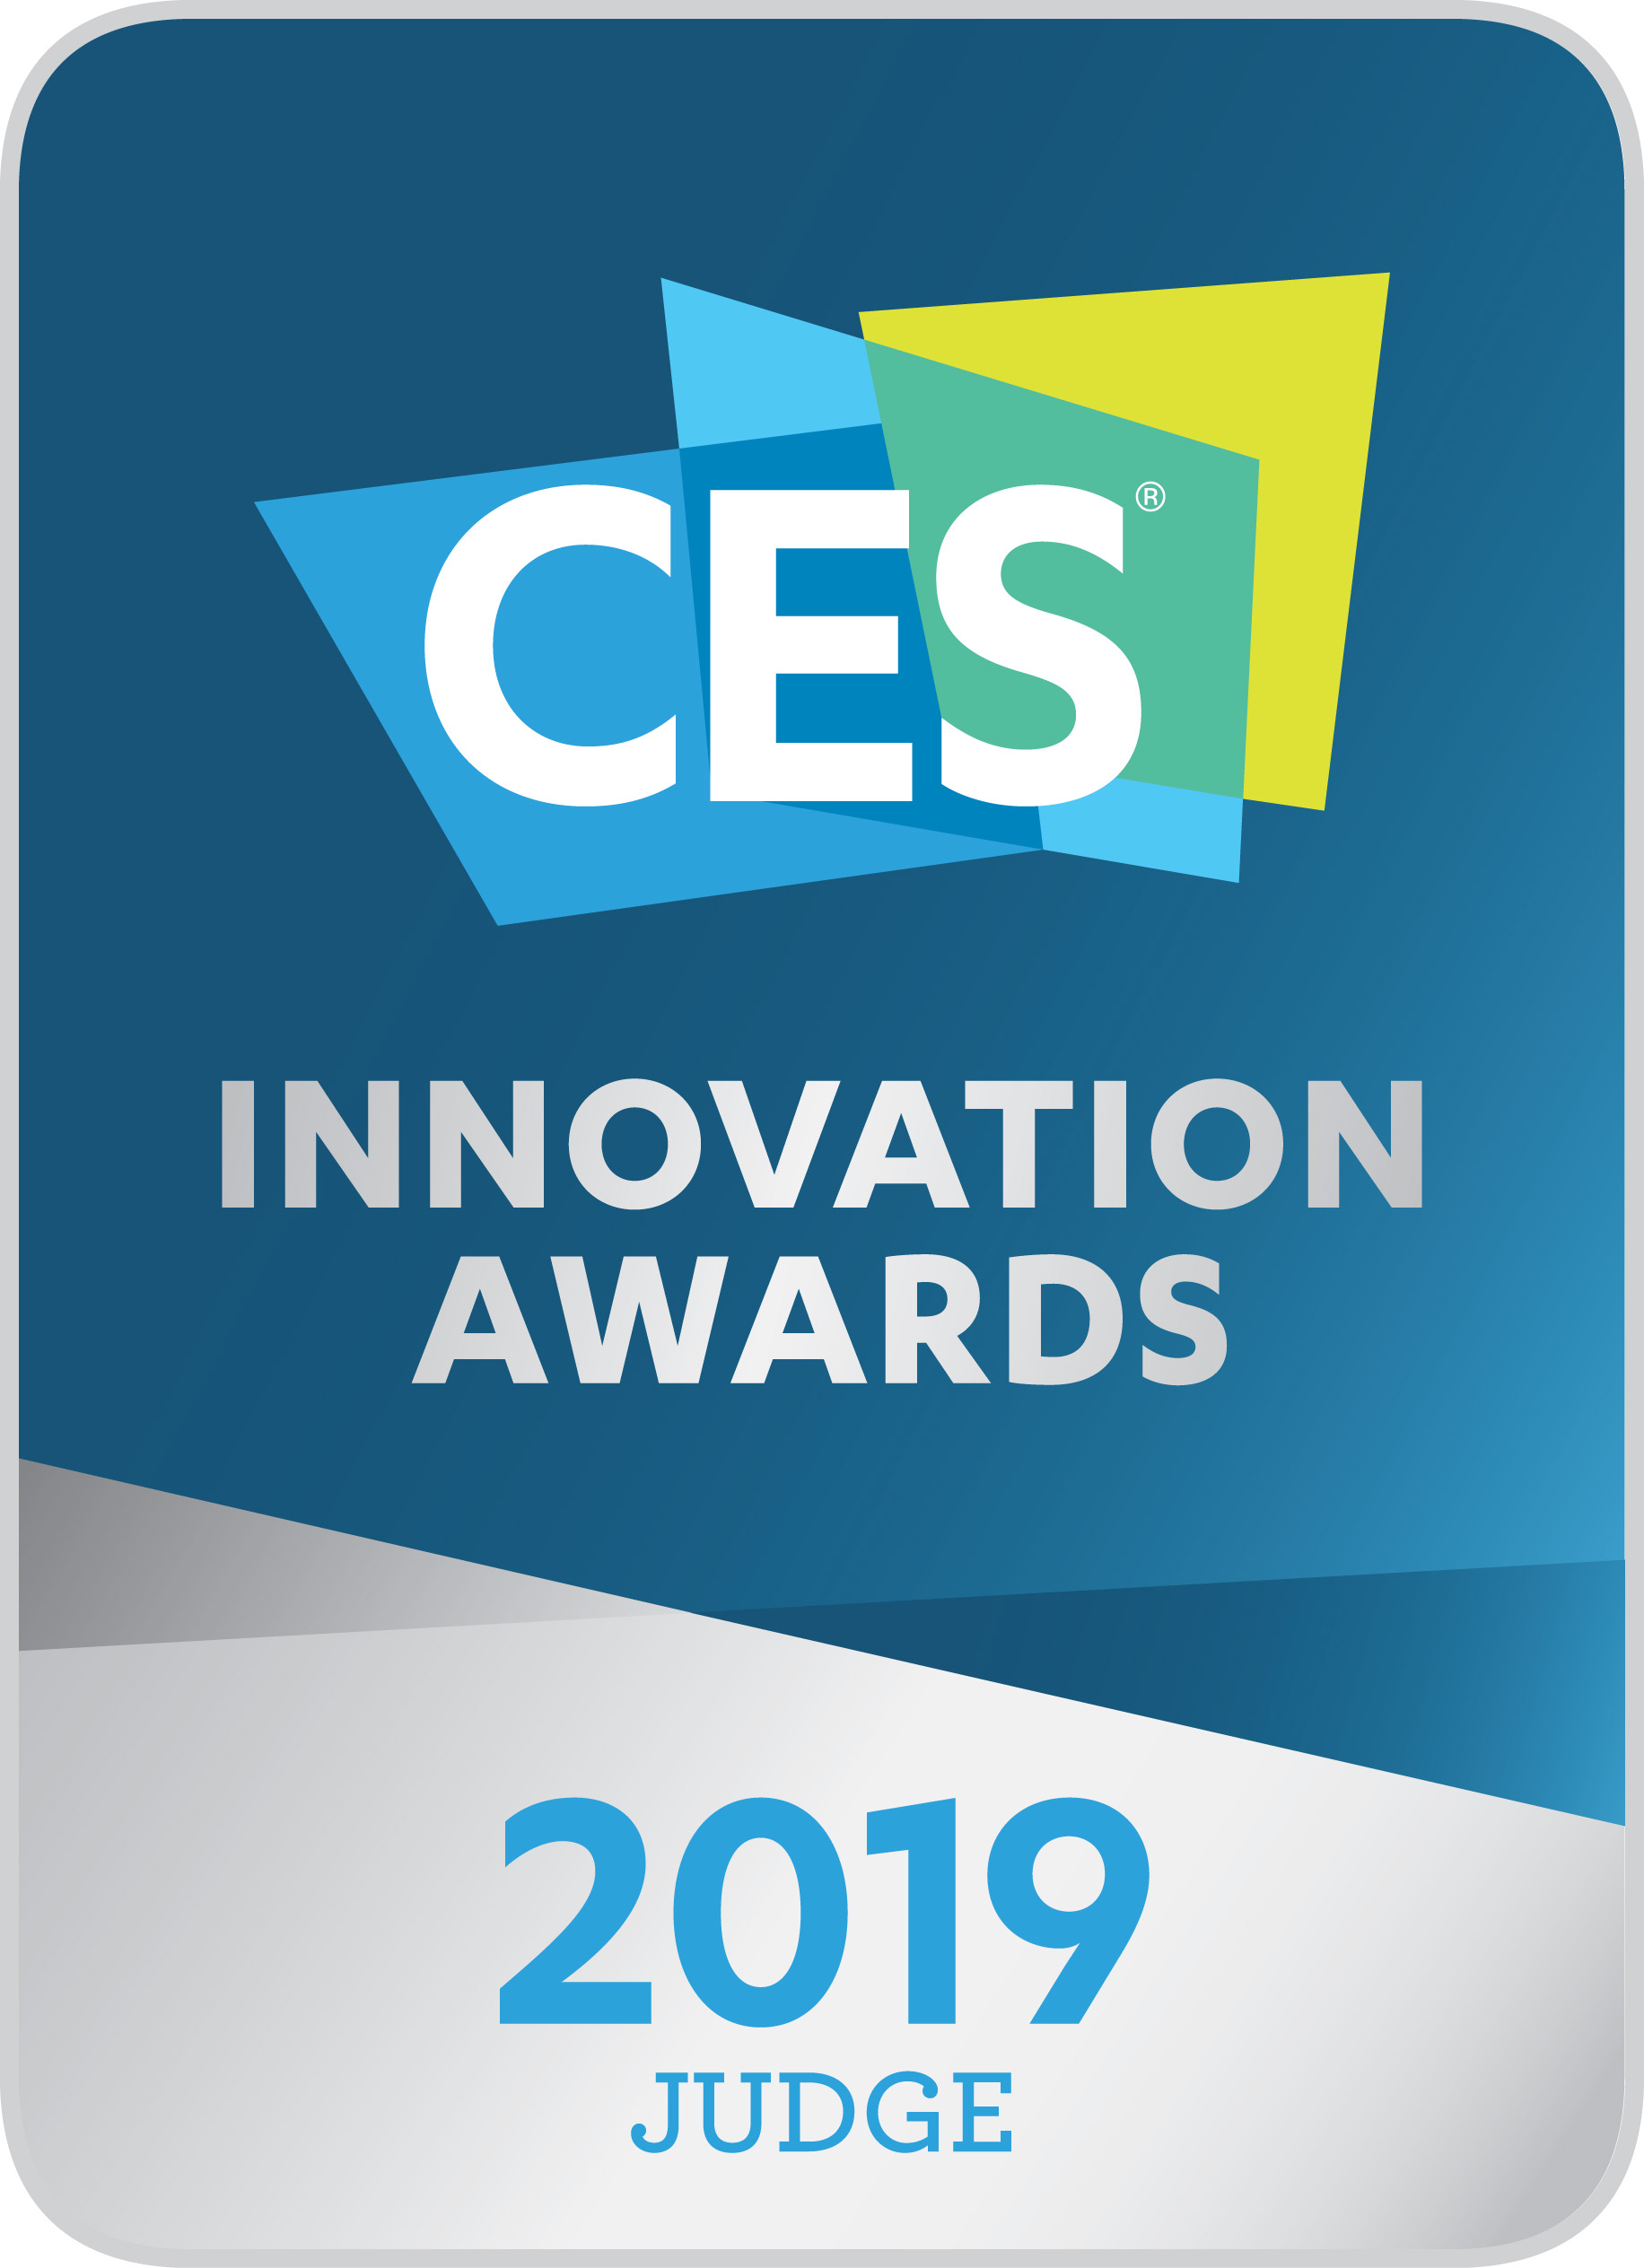 Karen Thomas, President & CEO, Thomas Public Relations is selected as judge for the CES 2019 Innovation Awards